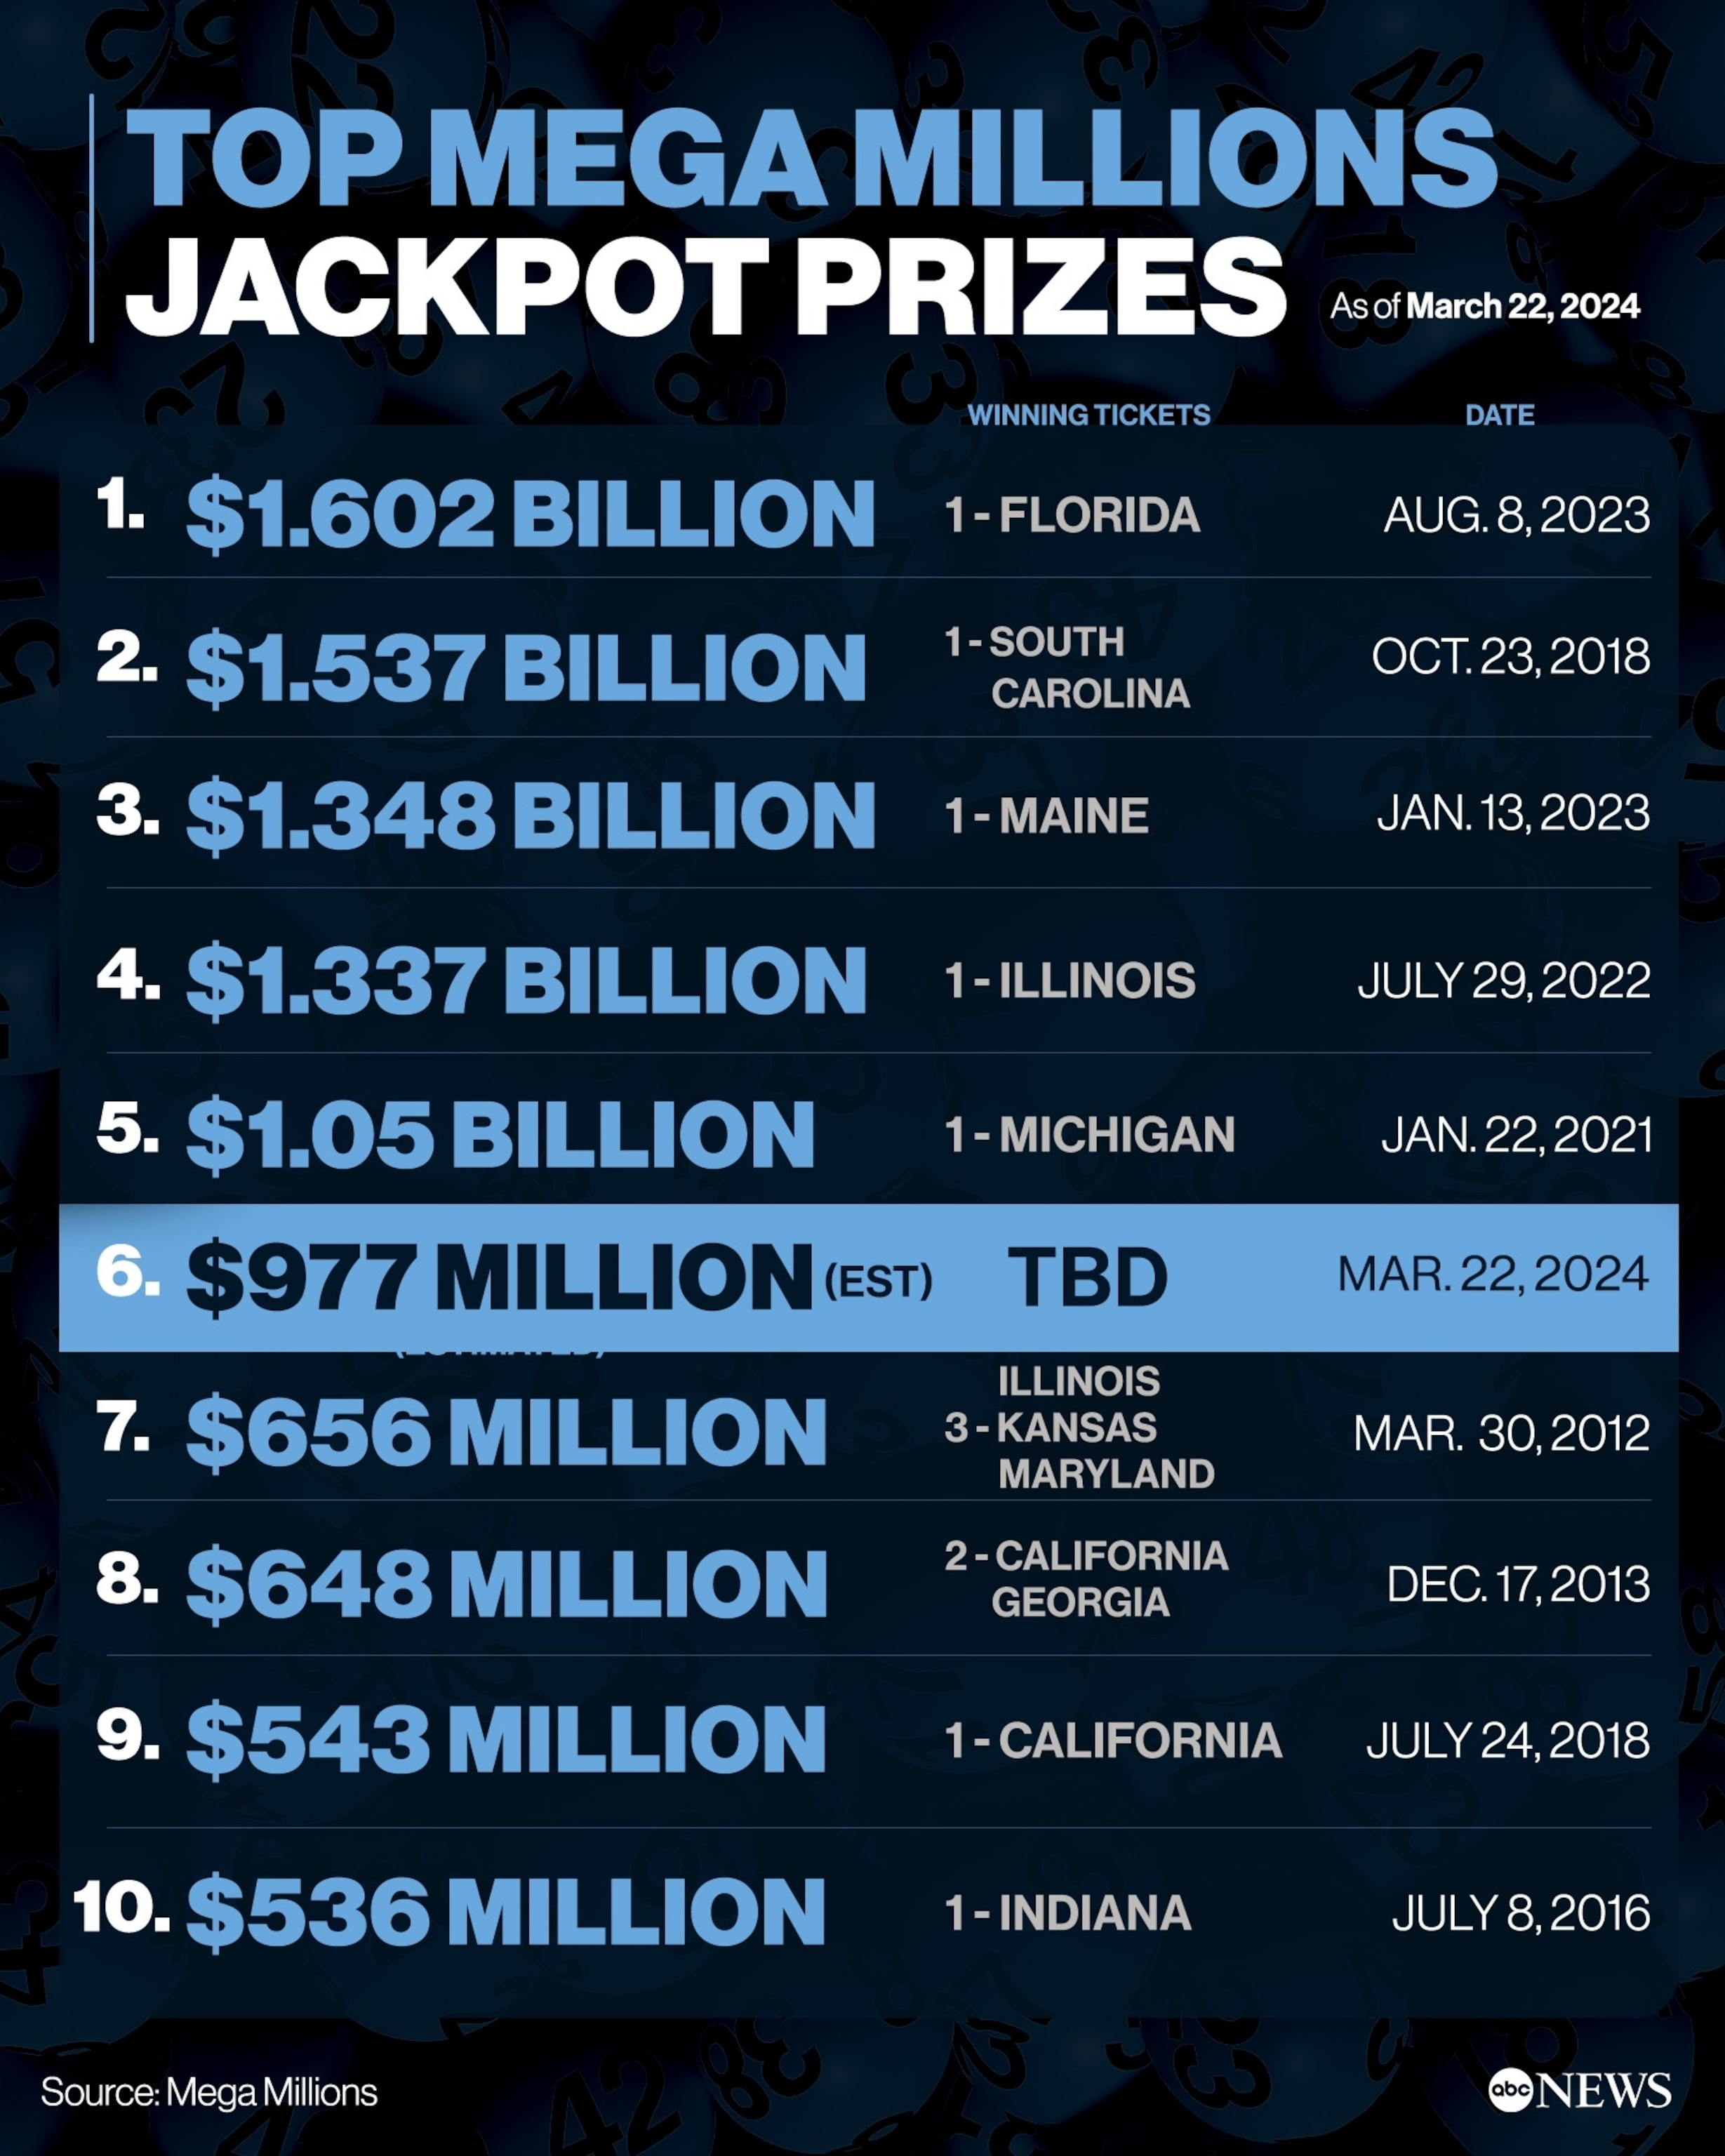 PHOTO: The 10 largest jackpot prizes in Mega Millions’ game history